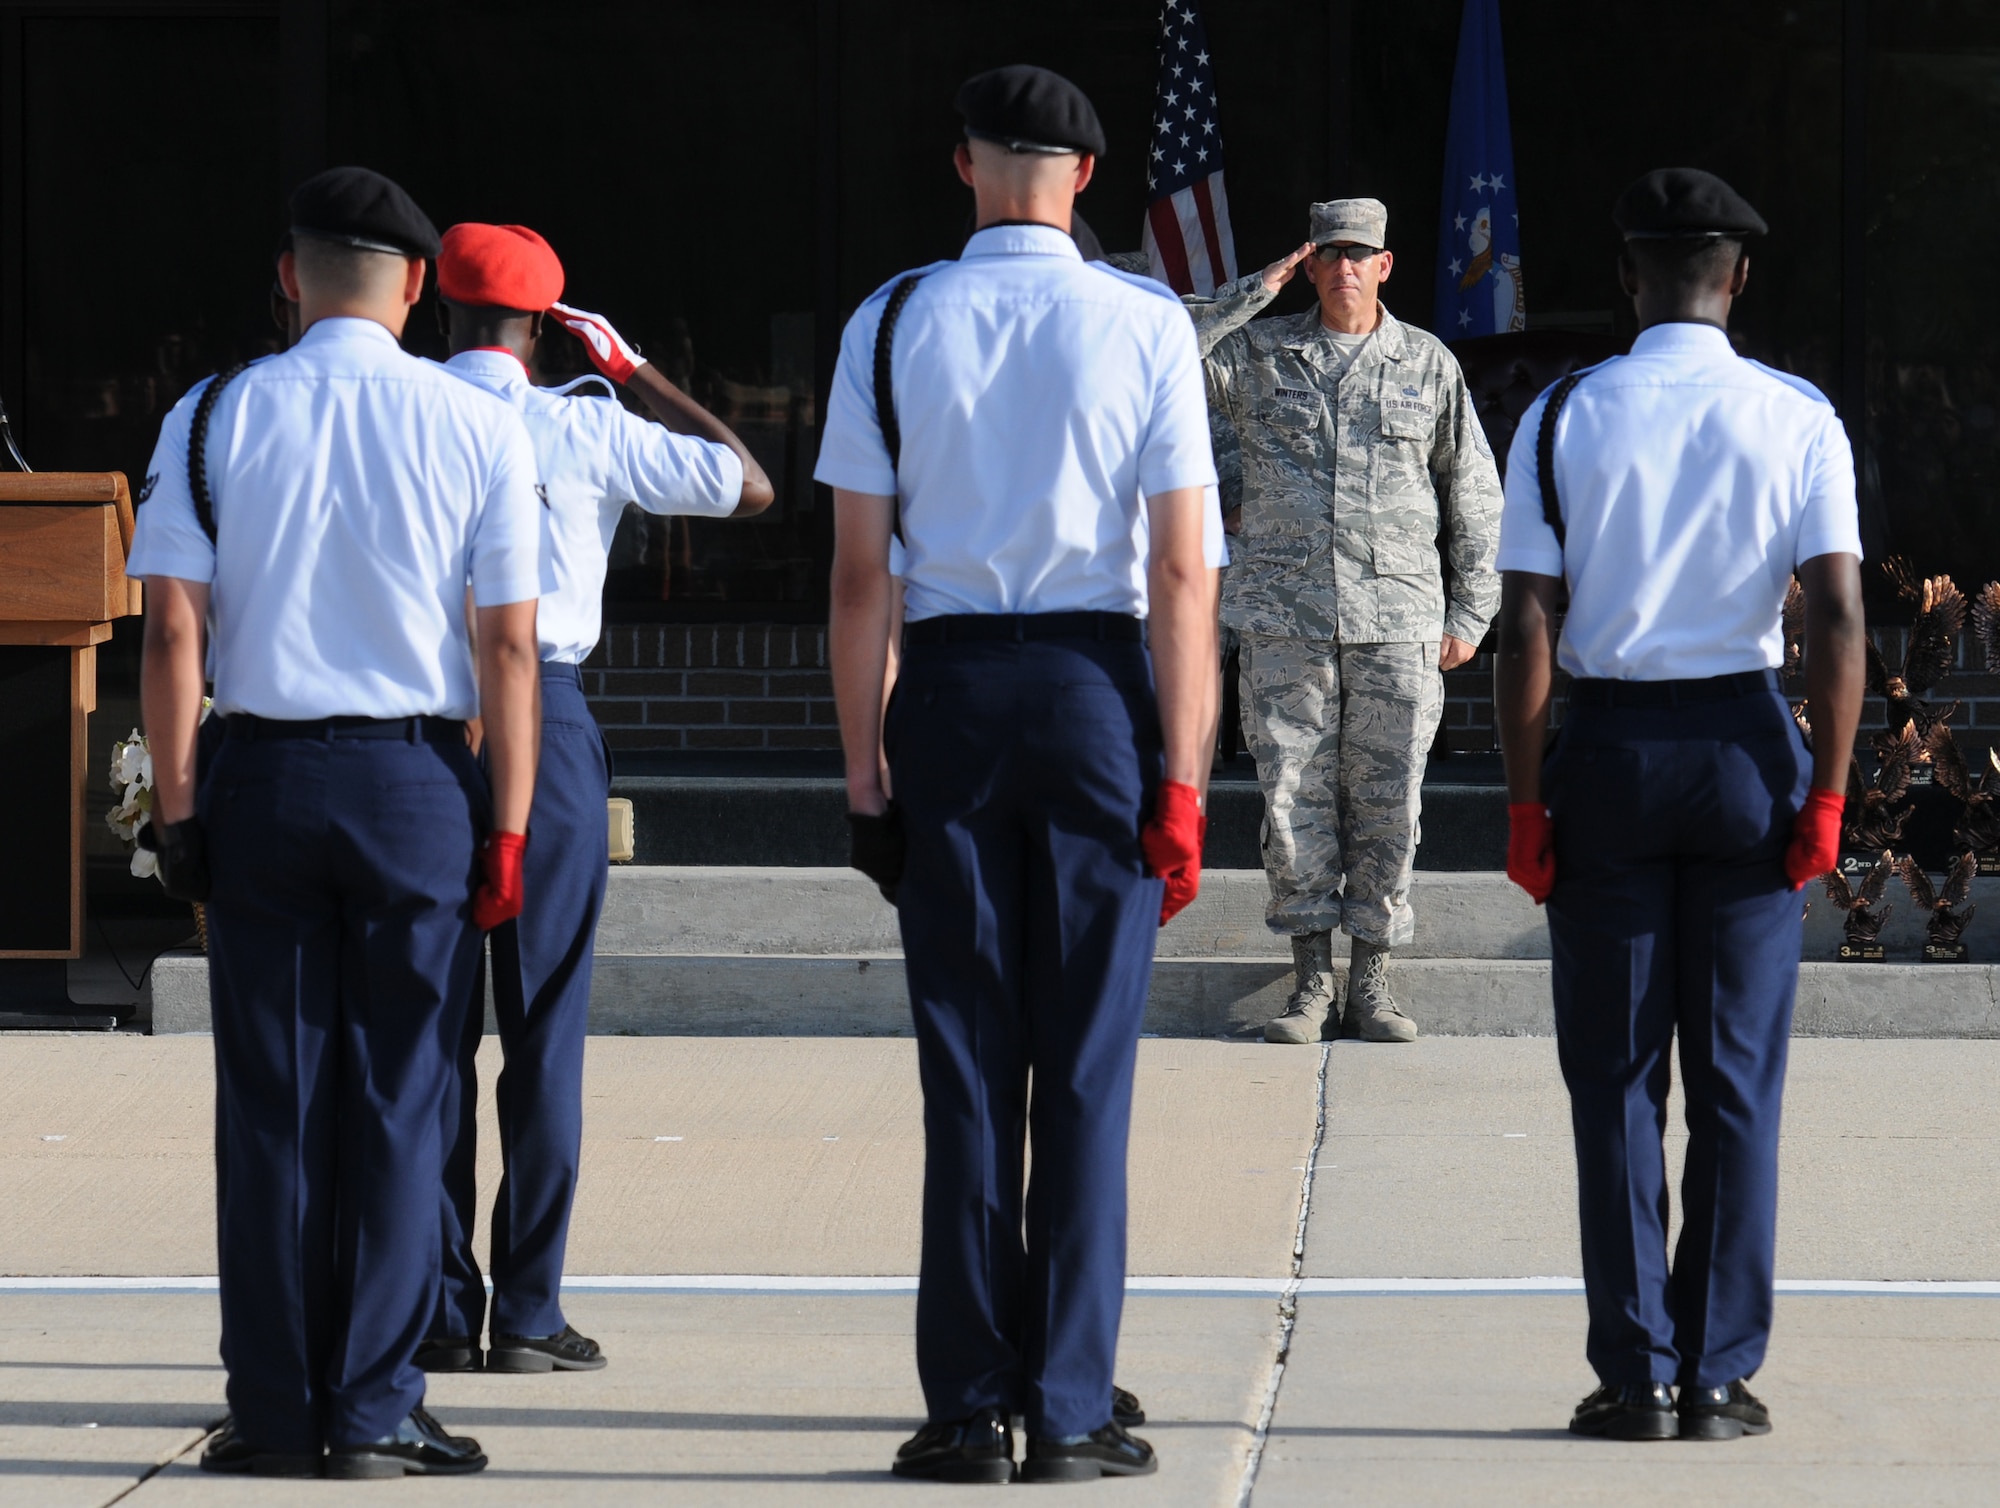 Chief Master Sgt. Robert Winters, 81st Training Group superintendent, renders a salute to the 336th Training Squadron regulation drill team during the 81st Training Group drill down at the Levitow Training Support Facility drill pad Sept. 9, 2016, Keesler Air Force Base, Miss. This was his last drill down as the 81st TRG superintendent before retiring with 29 years of service later that day. The 336th TRS “Red Wolves” placed first in freestyle and third in regulation and overall. (U.S. Air Force photo by Kemberly Groue/Released)